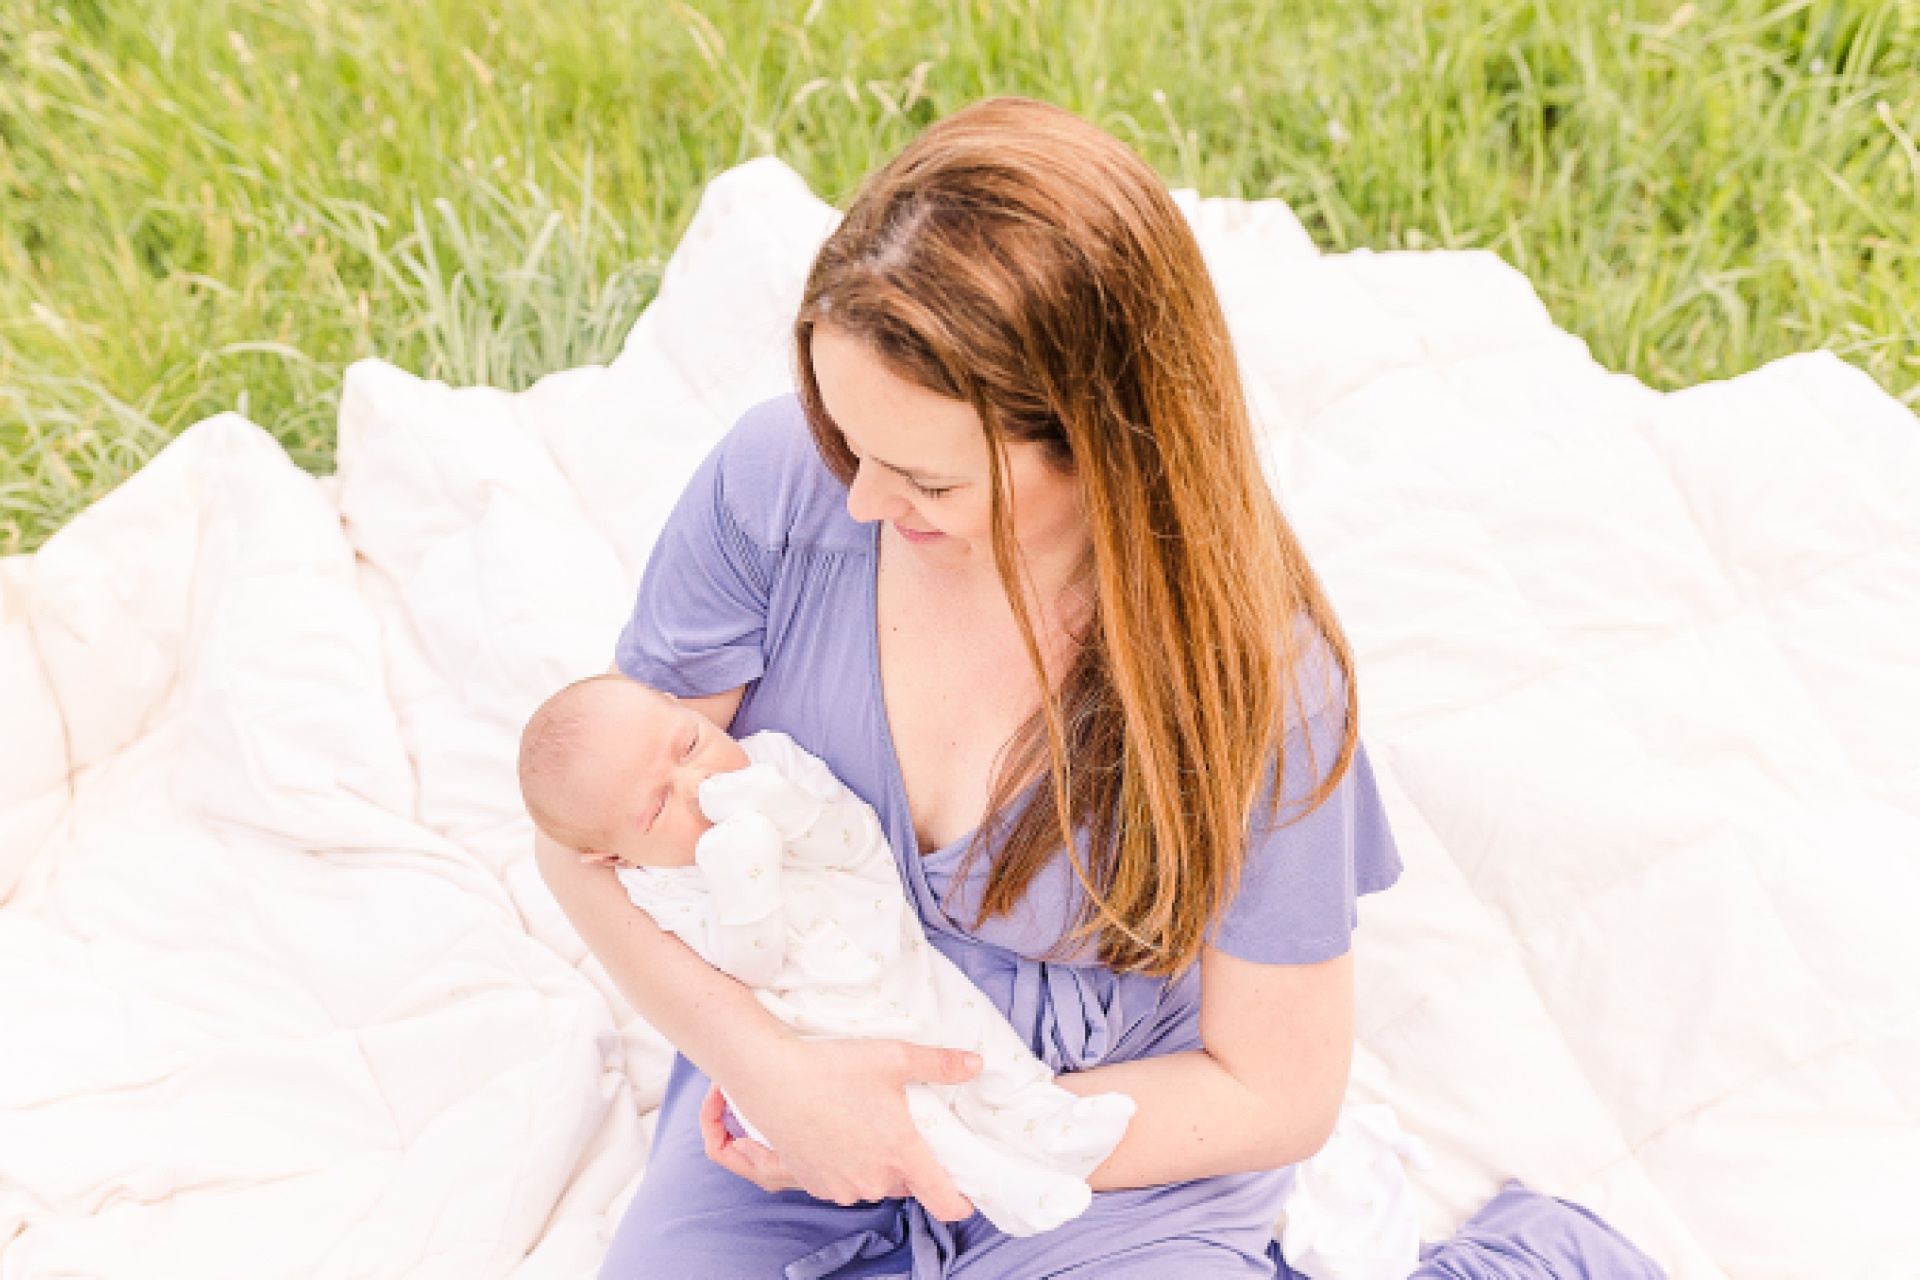 mom sits on blanket in a field holding baby during outdoor newborn photo session with Sara Sniderman Photography at Heard Farm Wayland Massachusetts